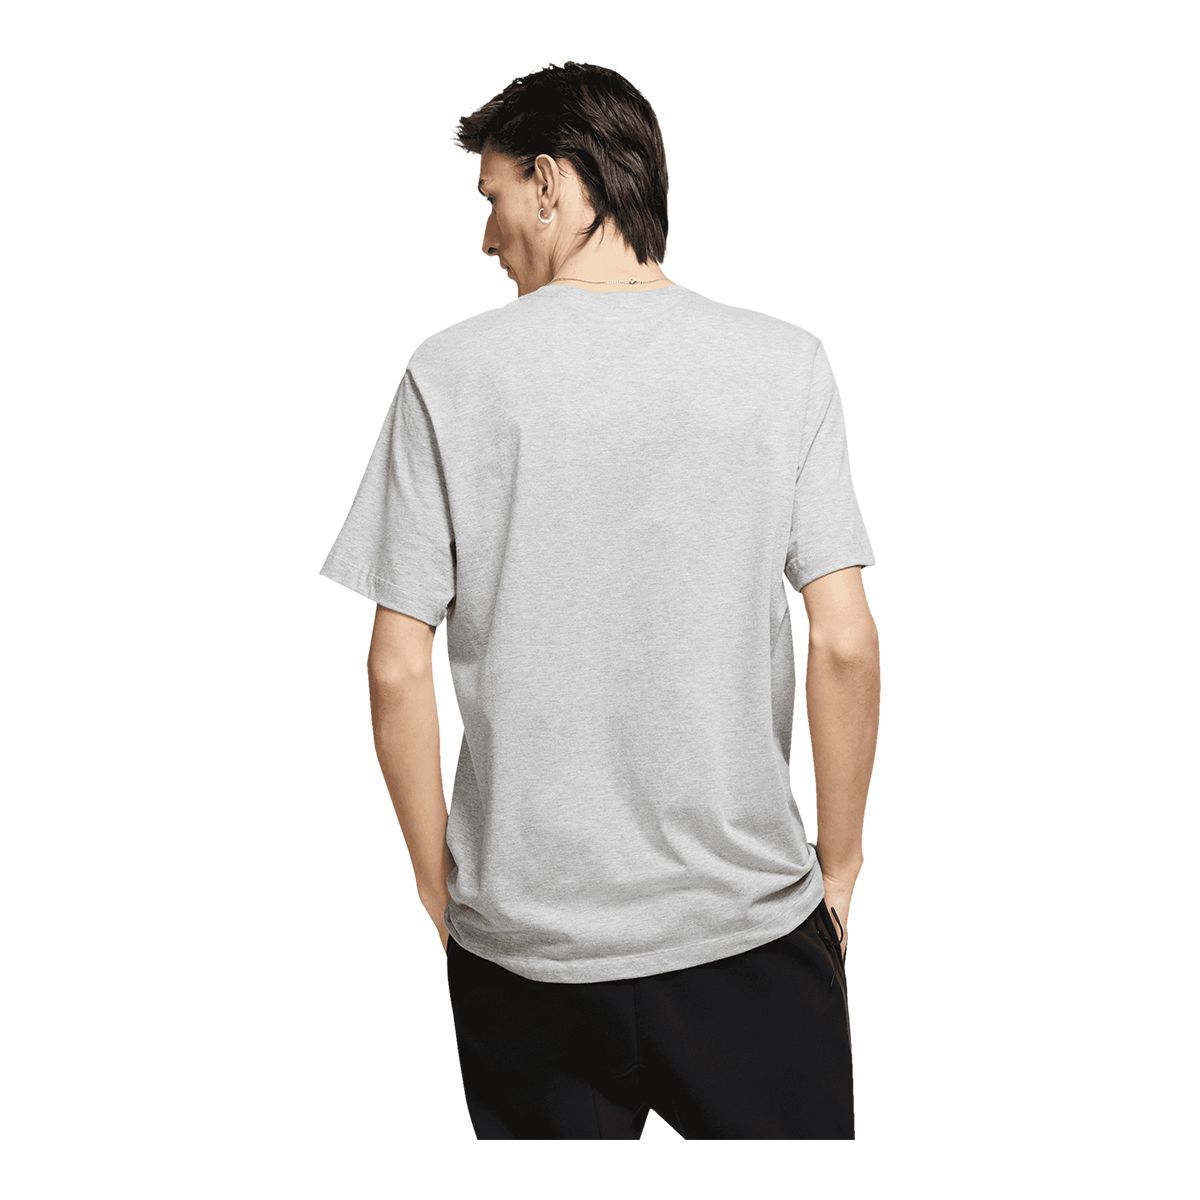 Men's Nike Sportswear Just Do It T Shirt And Shorts Outfit